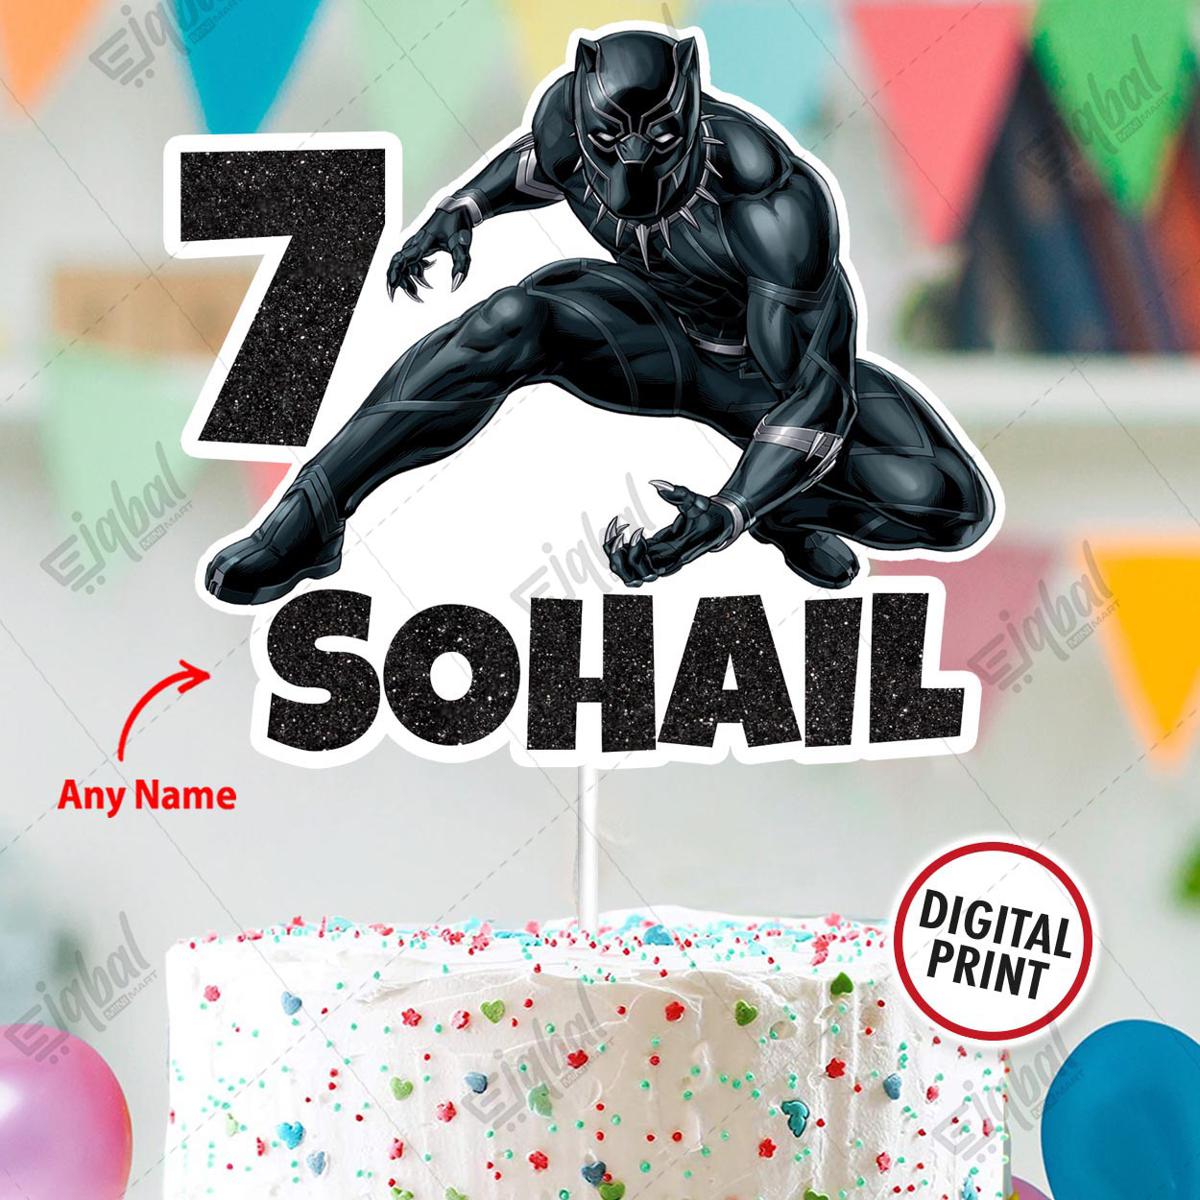 How to Plan a Black Panther Birthday Party in 7 Steps